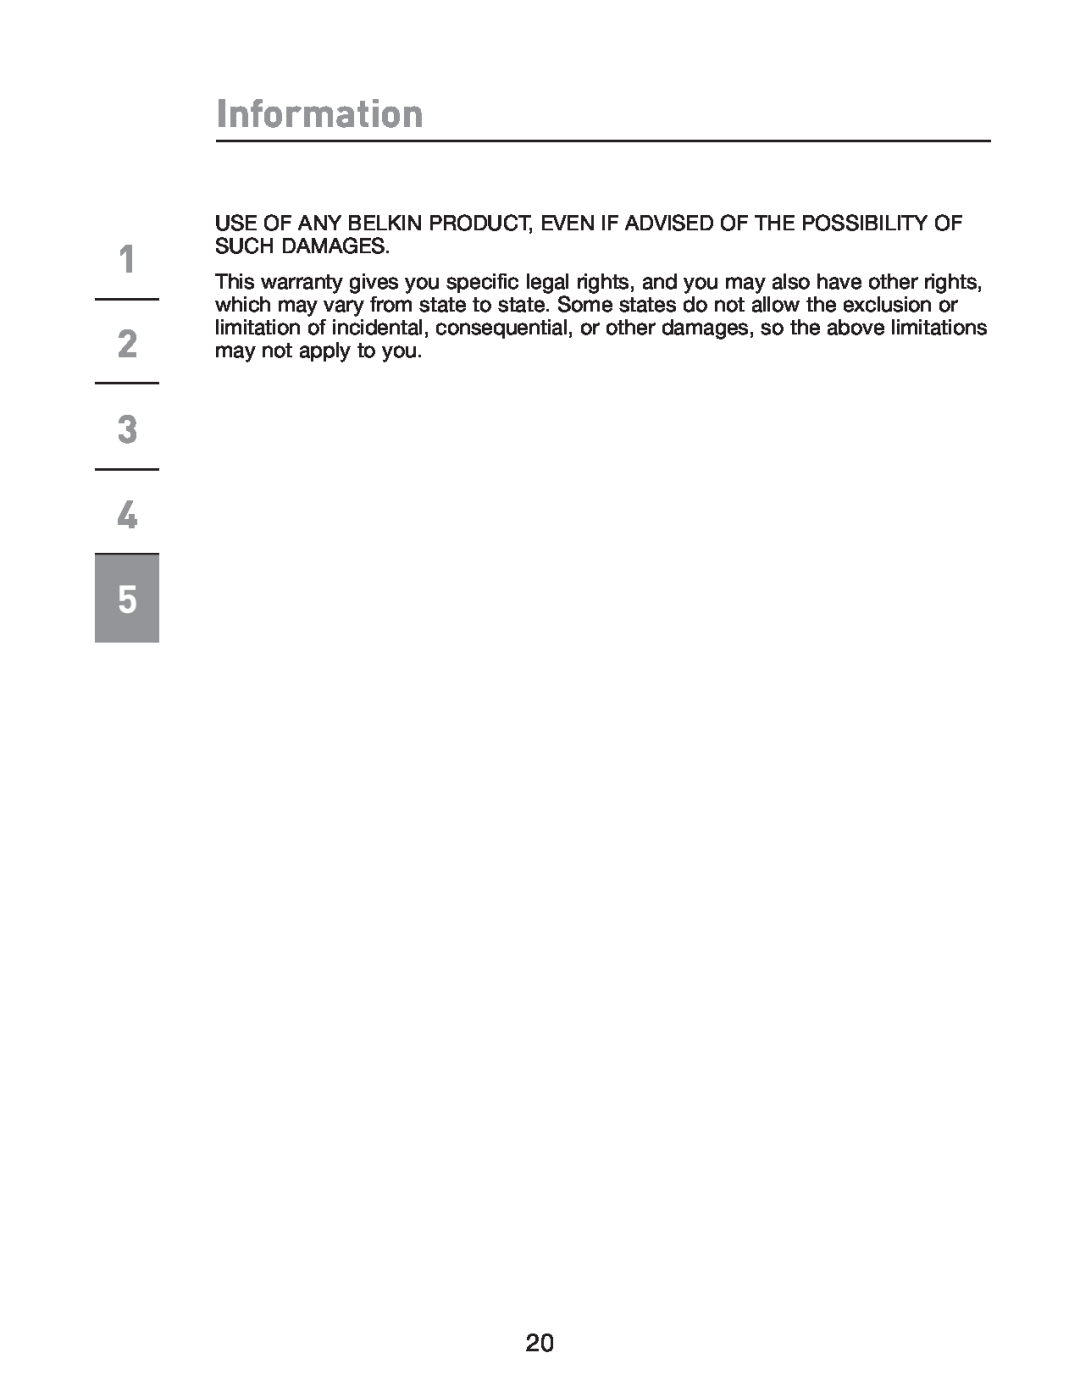 Belkin P75465-A manual Information, Use Of Any Belkin Product, Even If Advised Of The Possibility Of Such Damages 